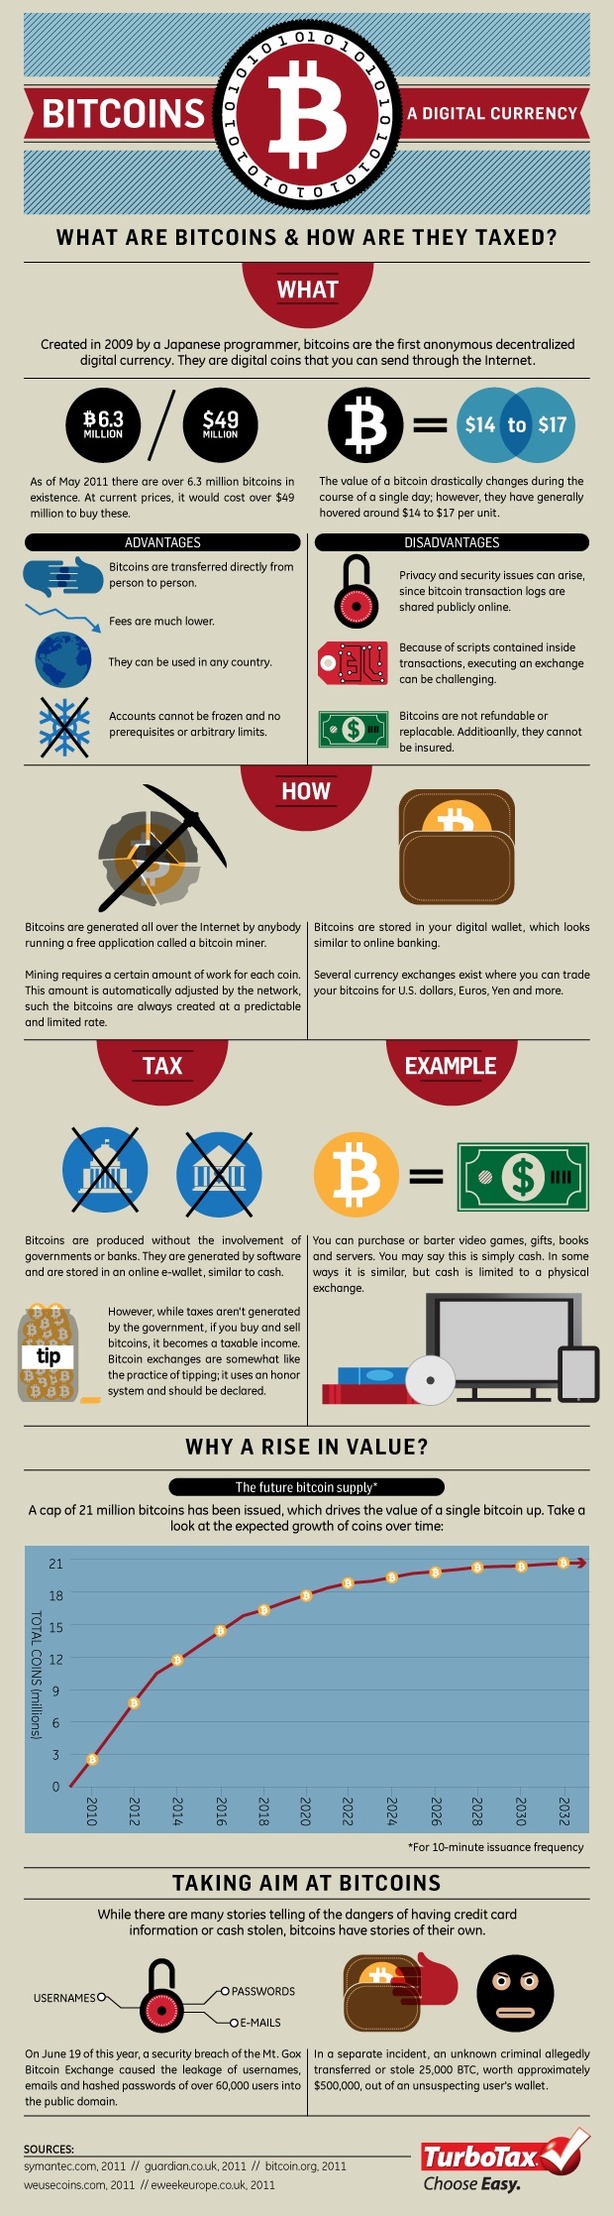 Infographic: What Are Bitcoins and How Are They Taxed?